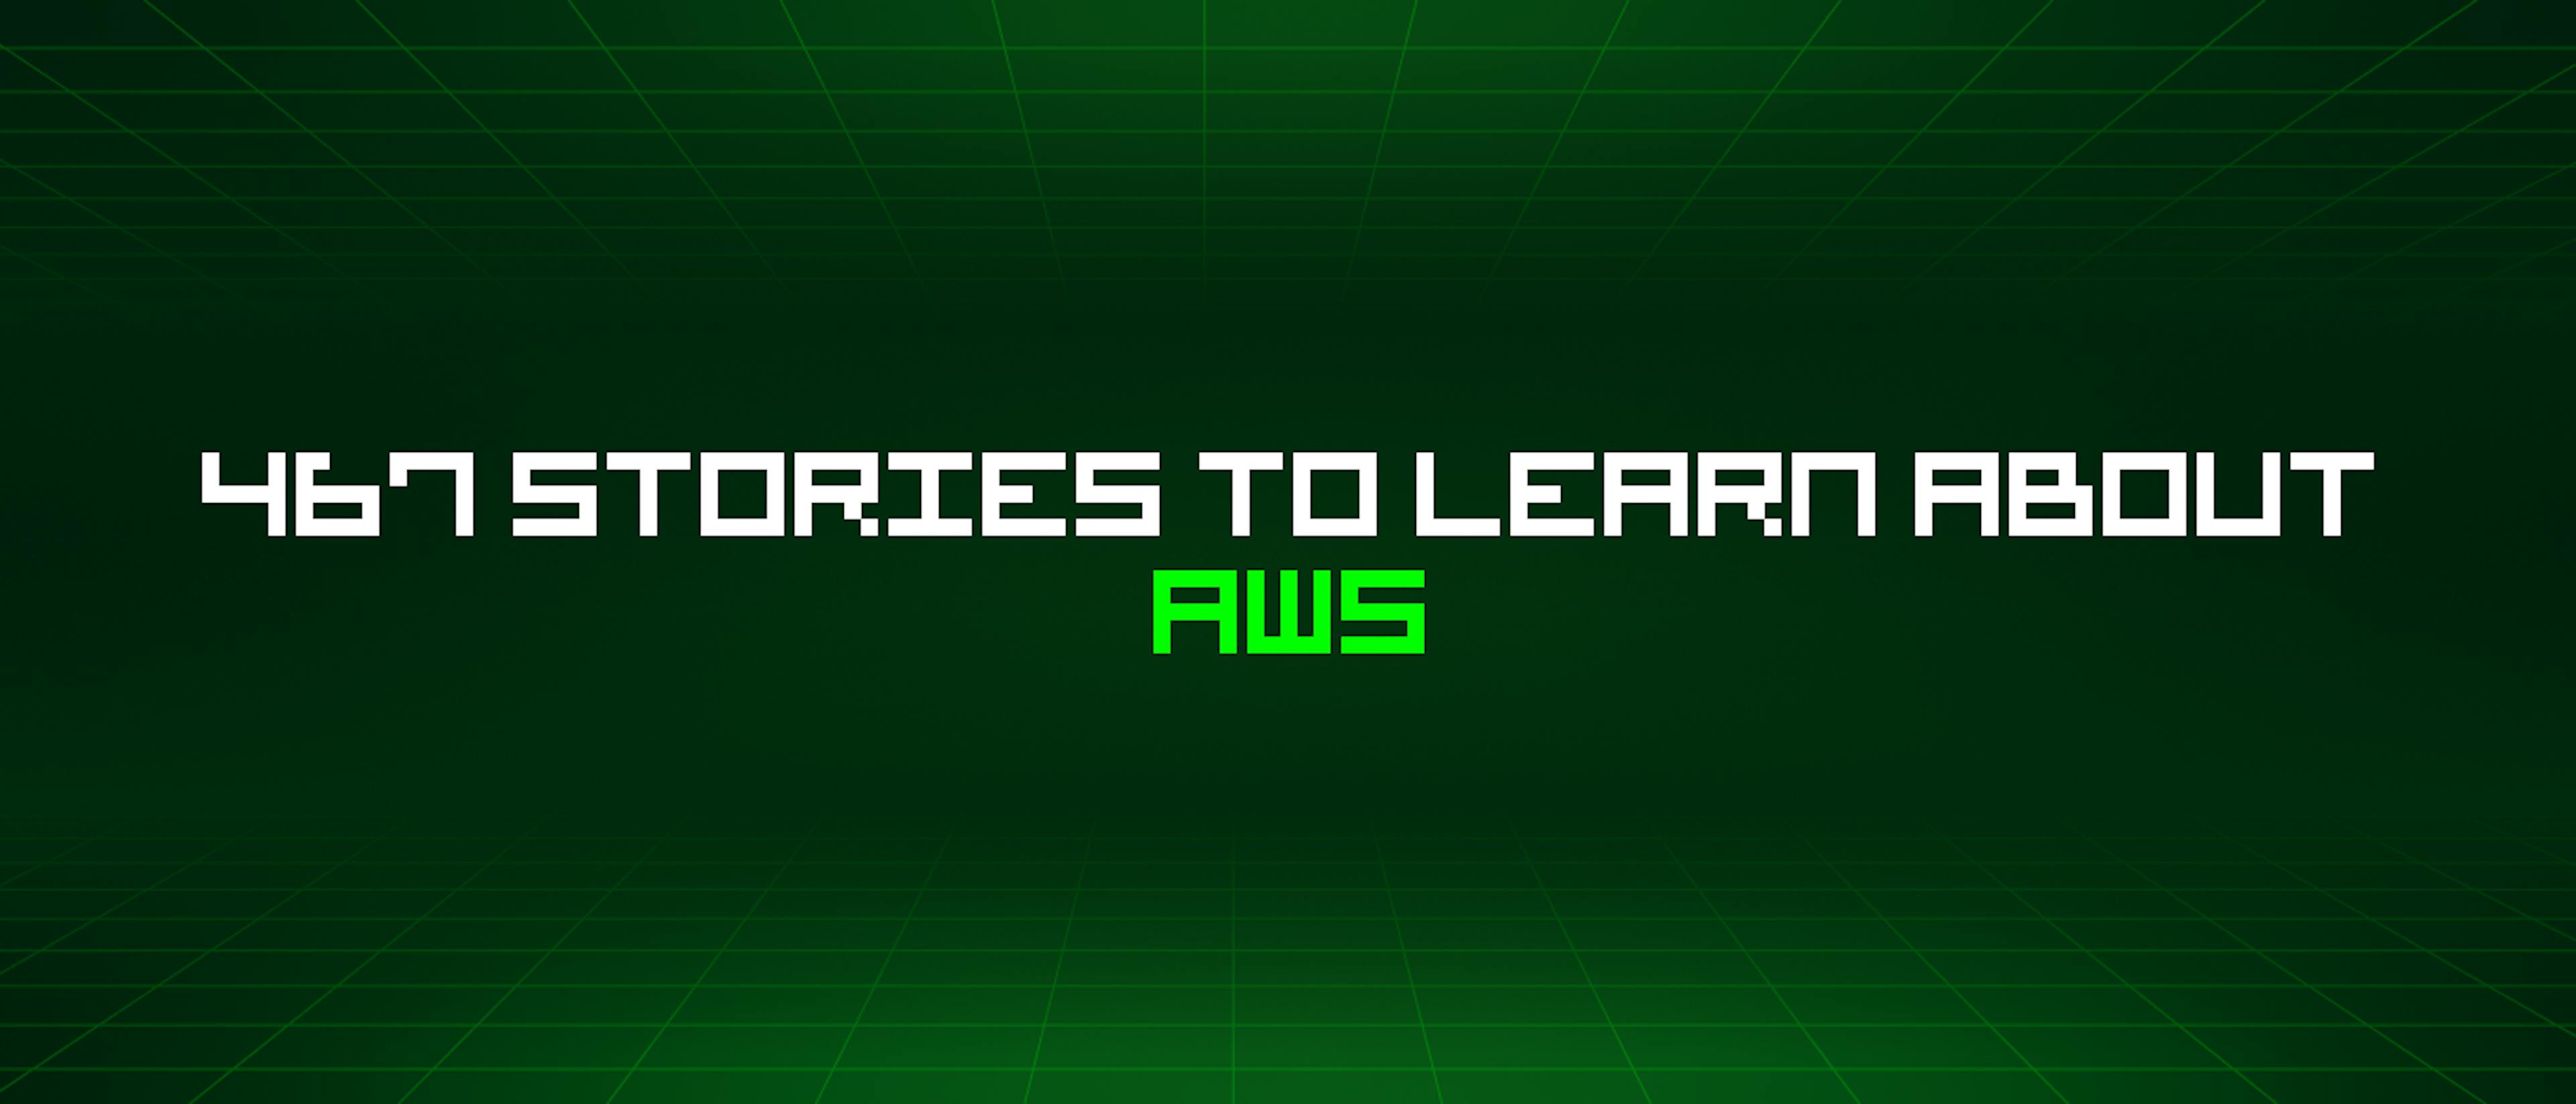 featured image - 467 Stories To Learn About Aws